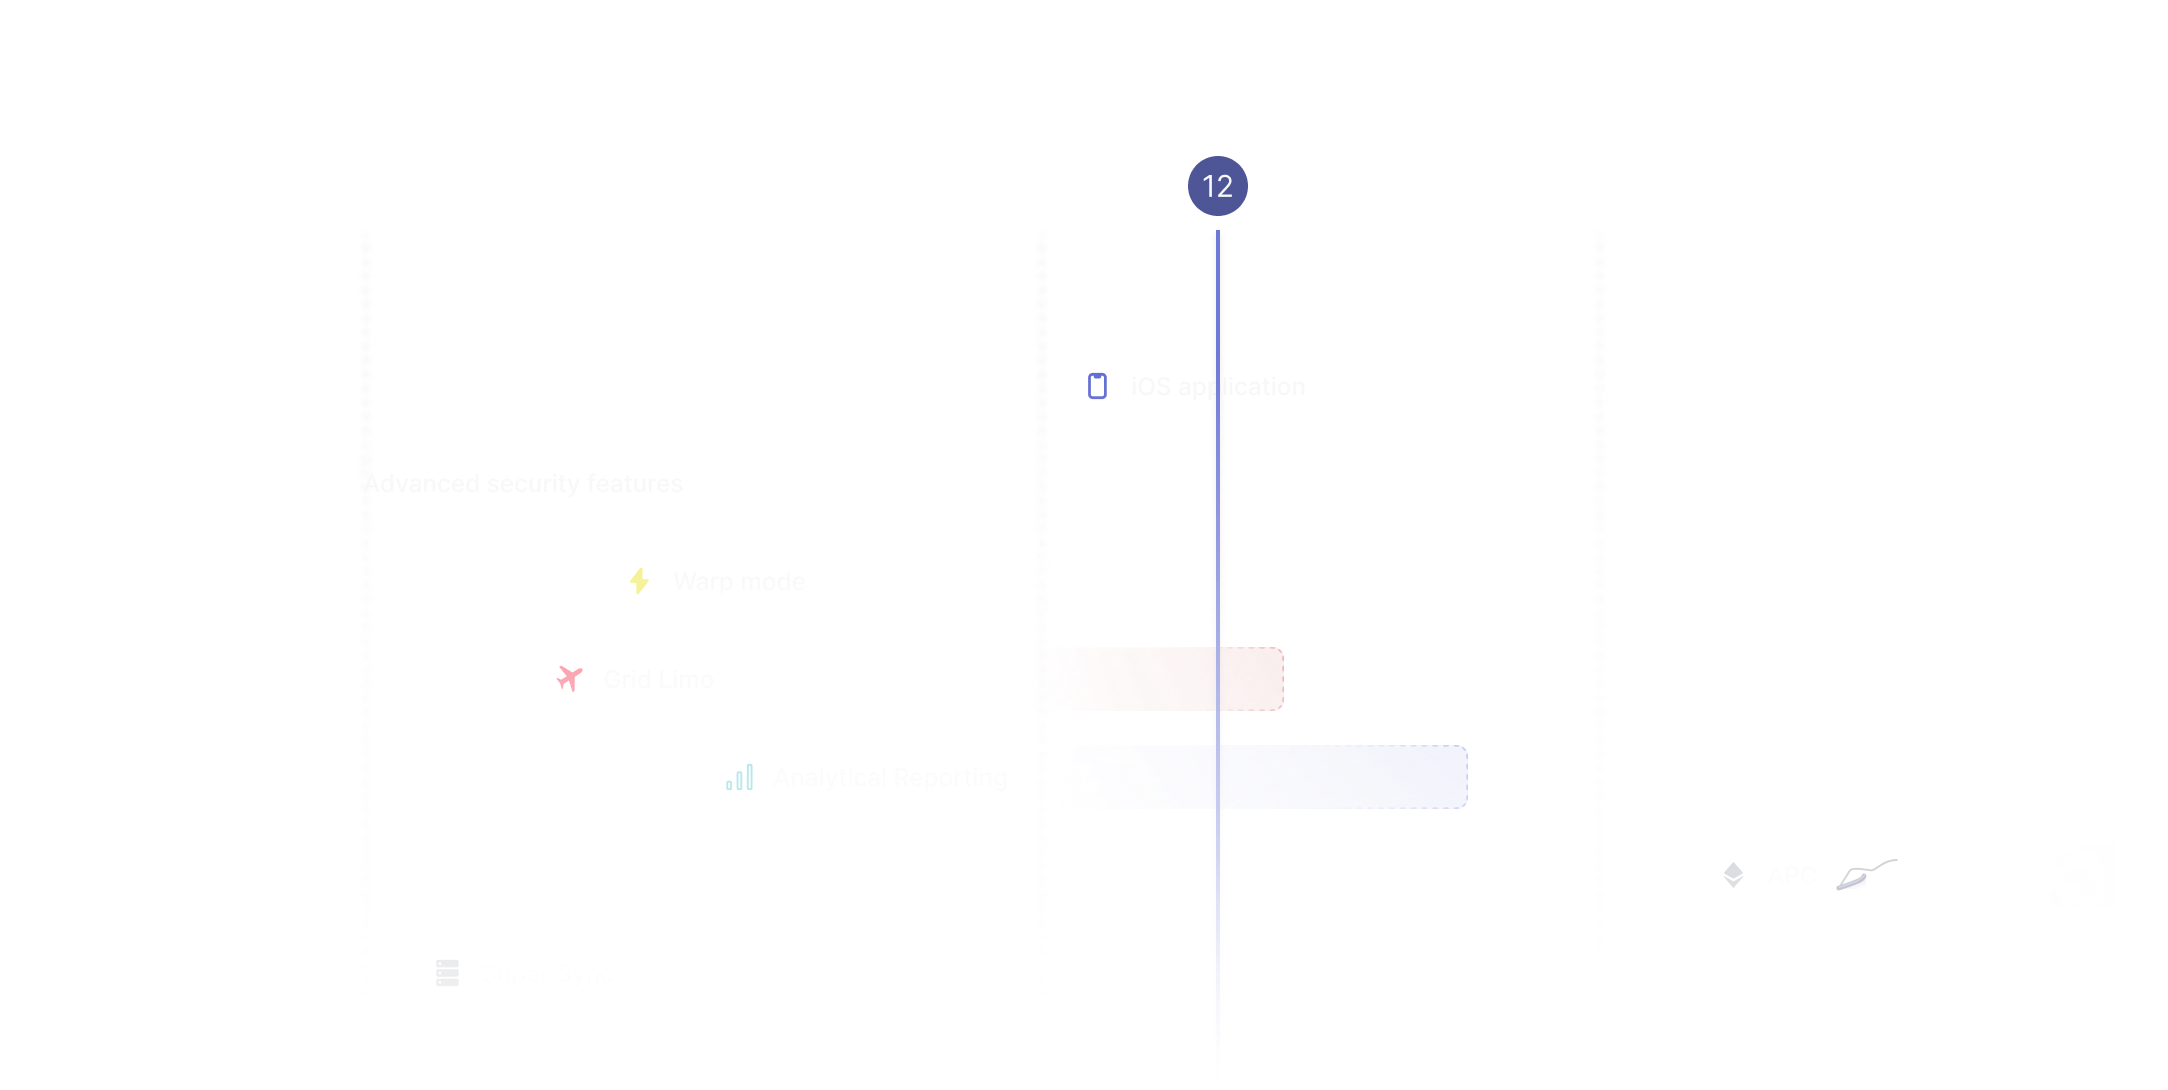 Linear's roadmap view in timeline mode, showing a list of projects and their associated start/end dates across the months of September, October, and November. Some of the project names are 'iOS app', 'advanced security features', 'wrap mode', and 'super sync'.